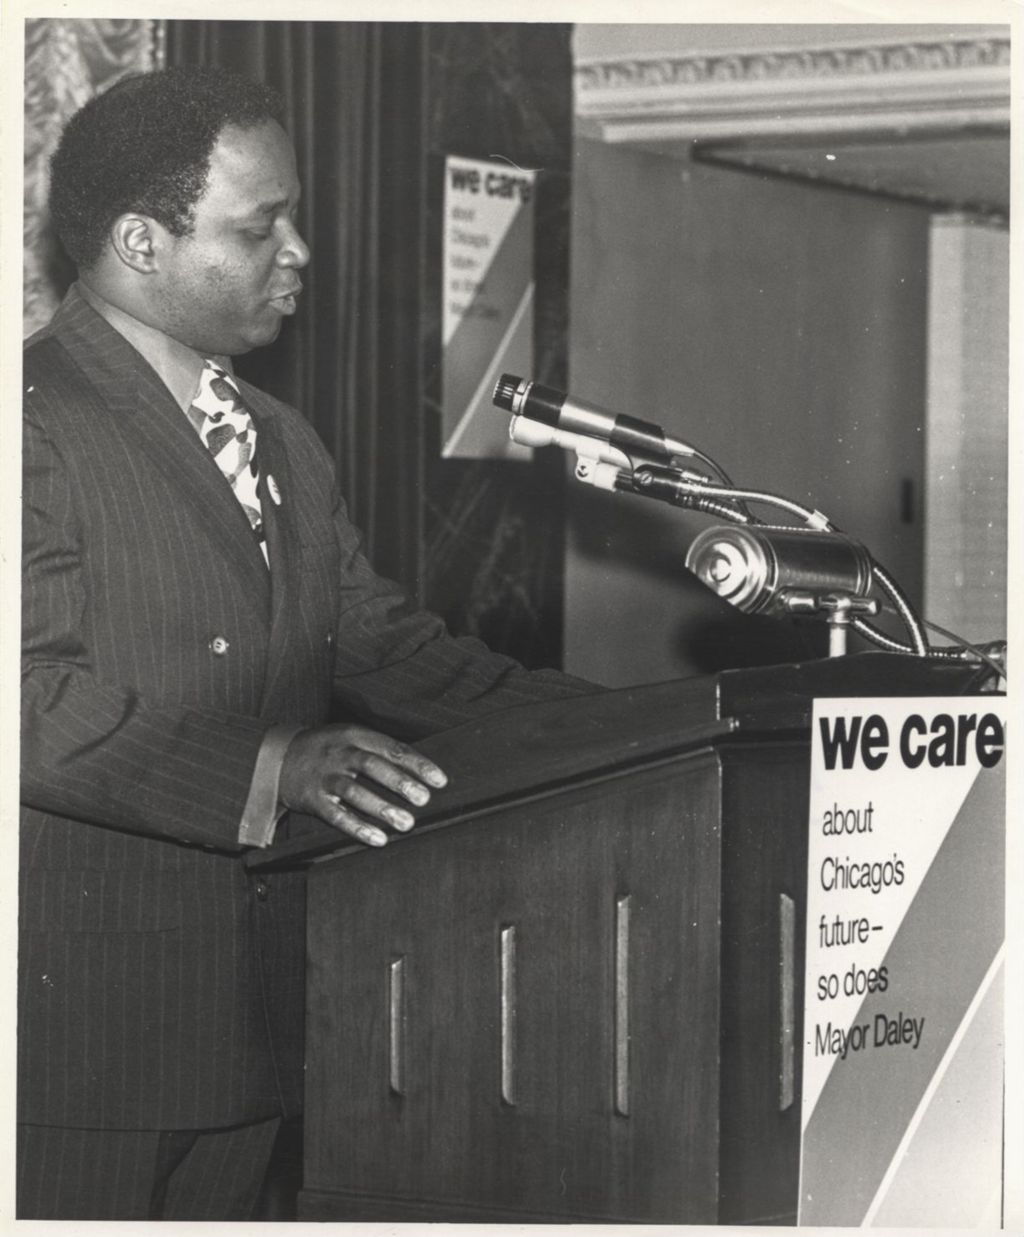 Man speaking at a "We Care" campaign event